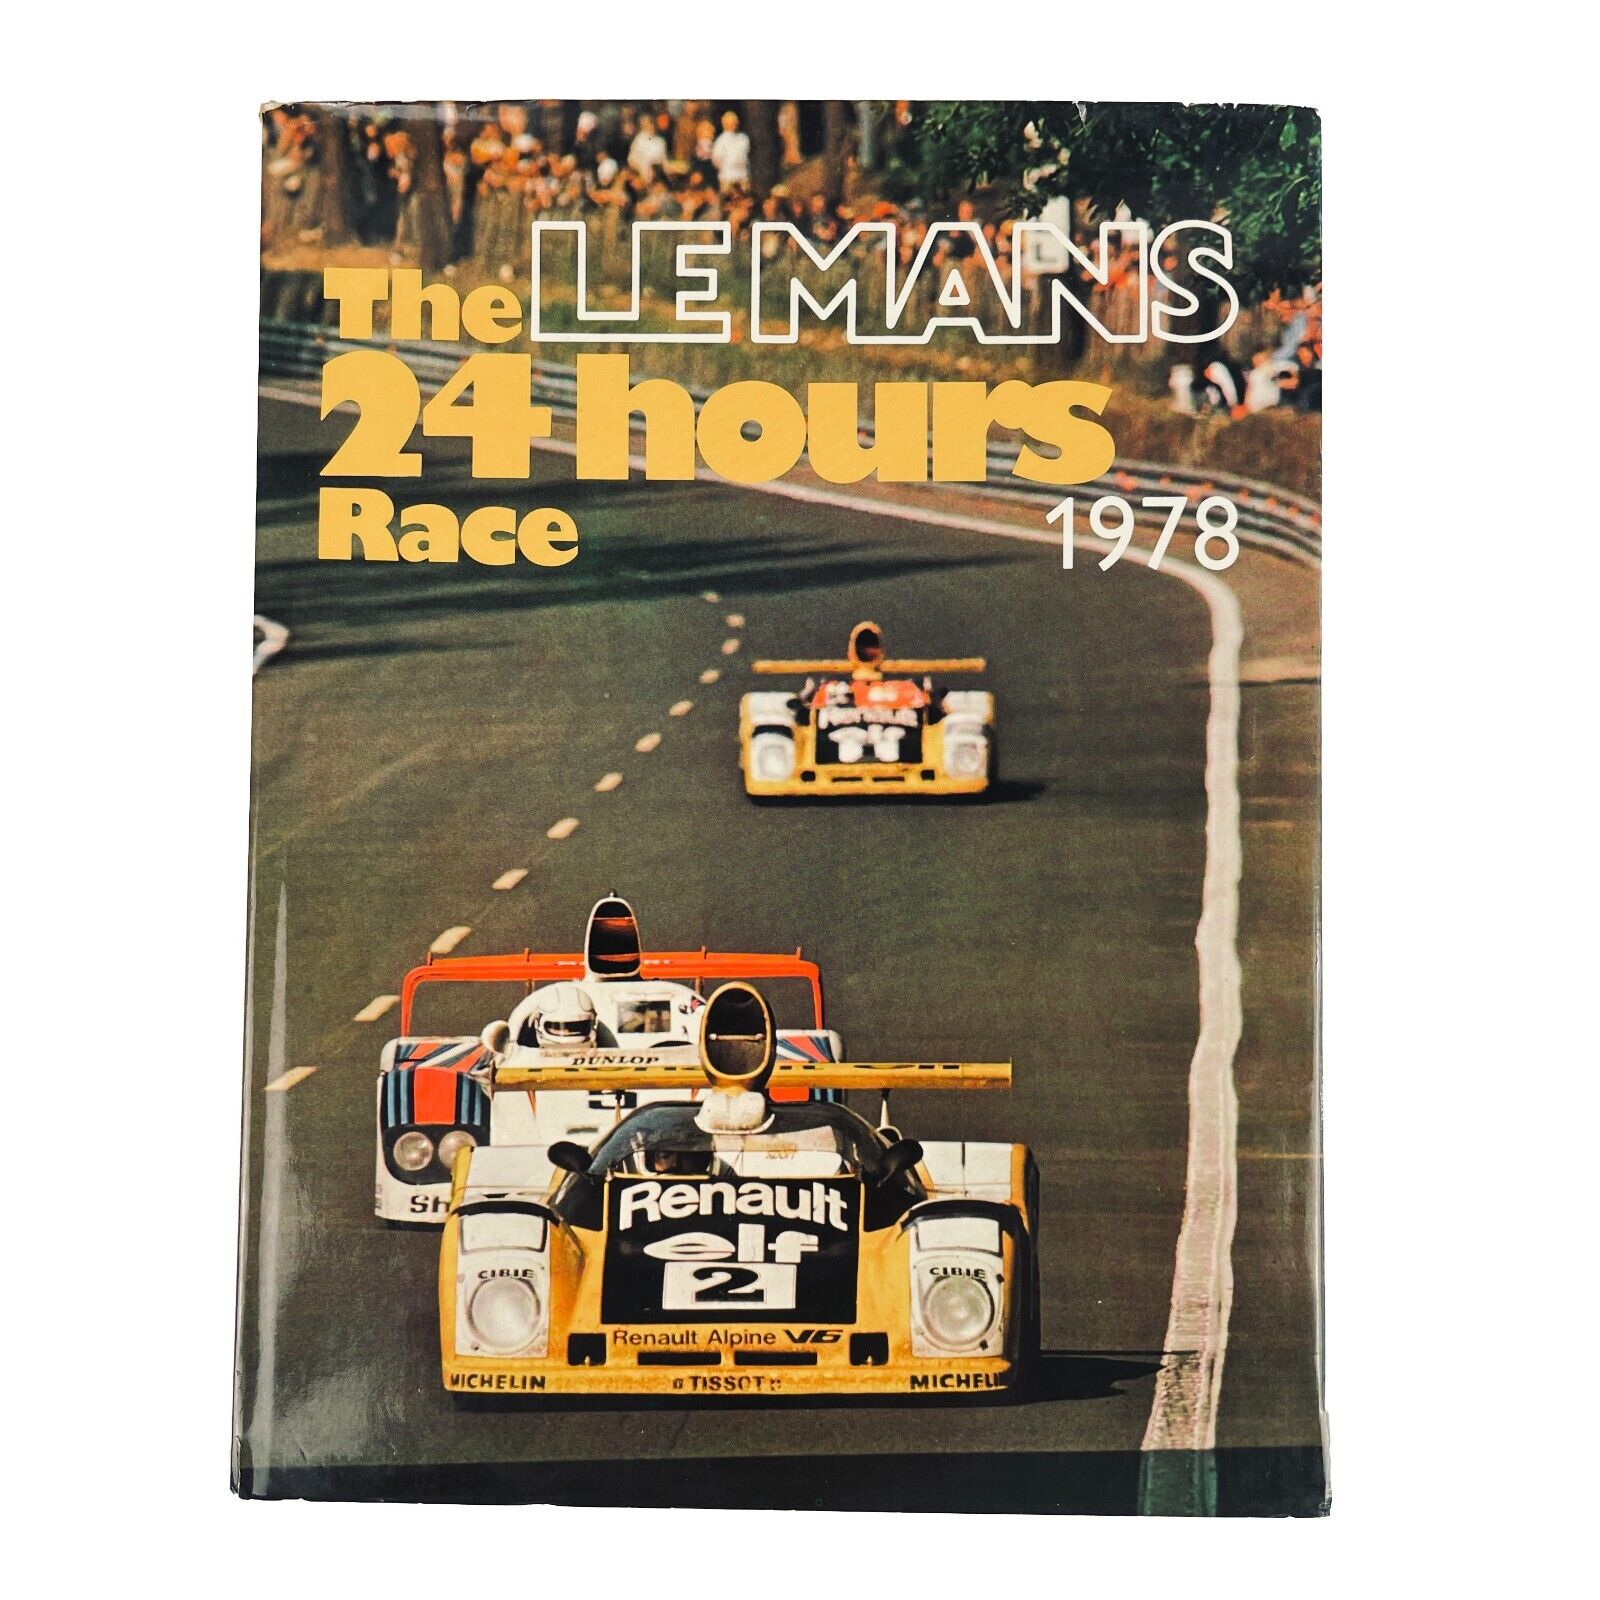 The Le Mans 24 Hours Race 1978 by Christian Moity, Jean -Marc Teissedre